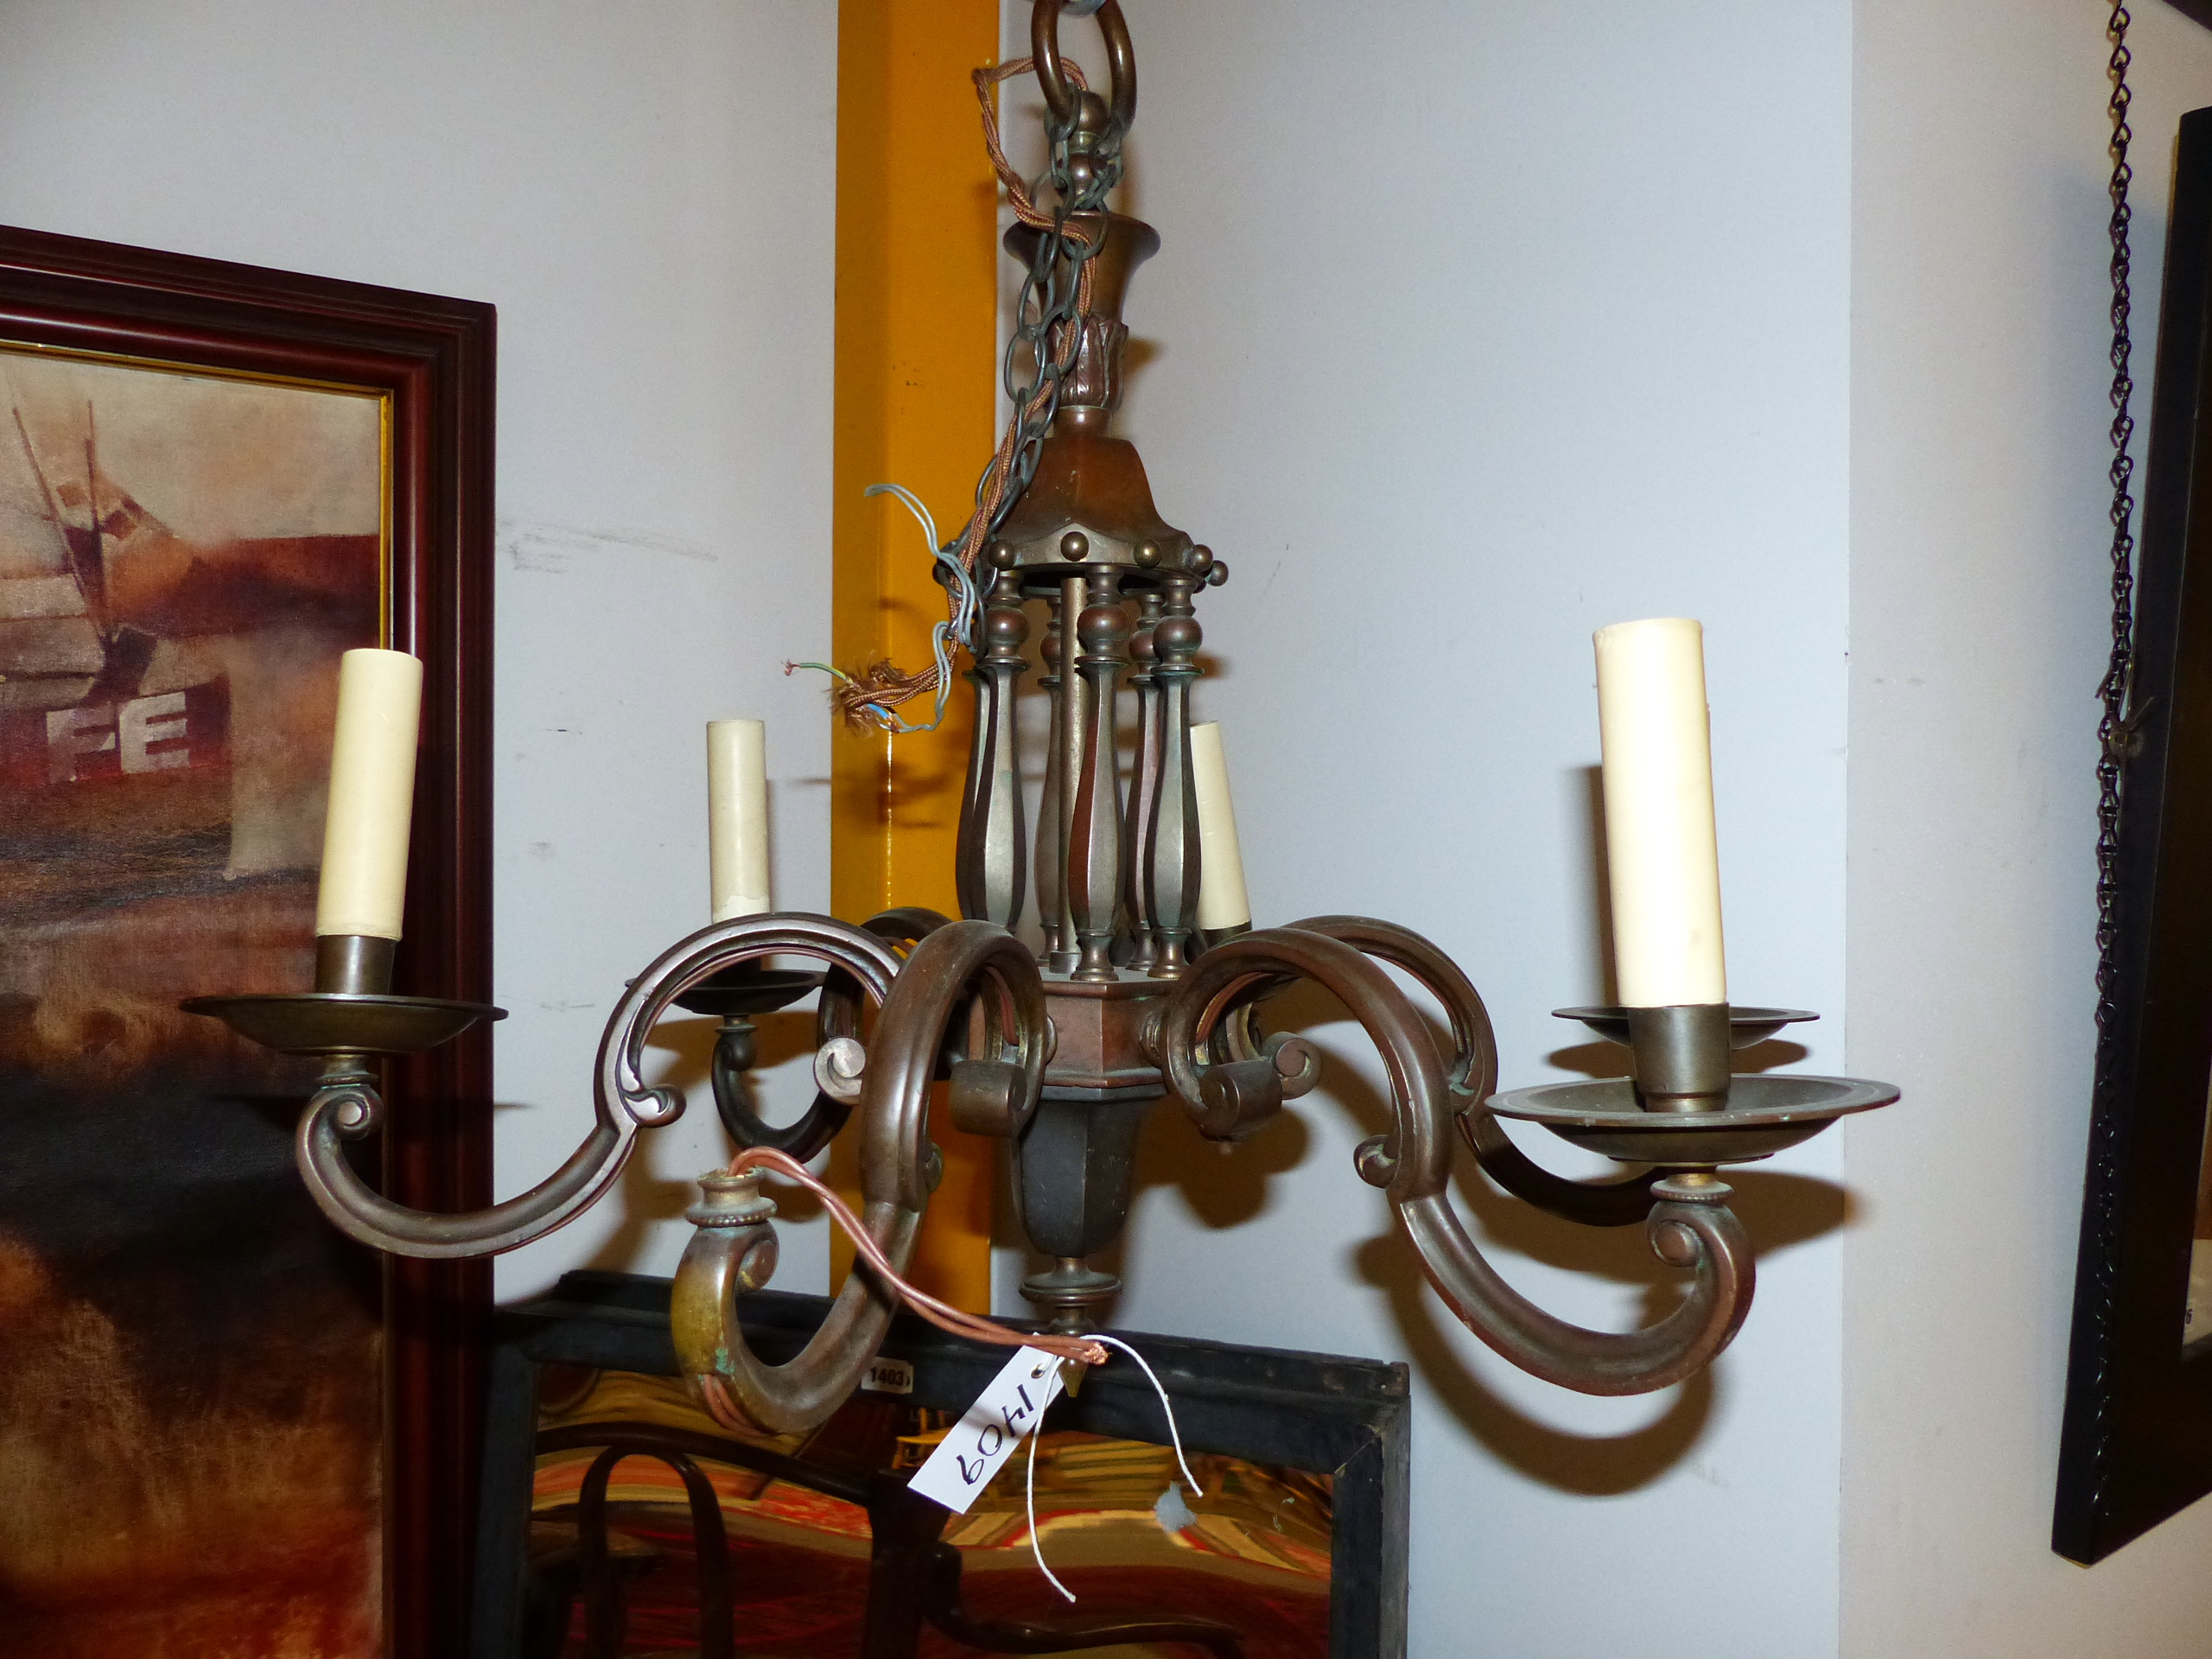 AN EARLY 20th.C.PATINATED BRONZE SIX LIGHT CHANDELIER IN THE DUTCH TASTE. H.55cms.